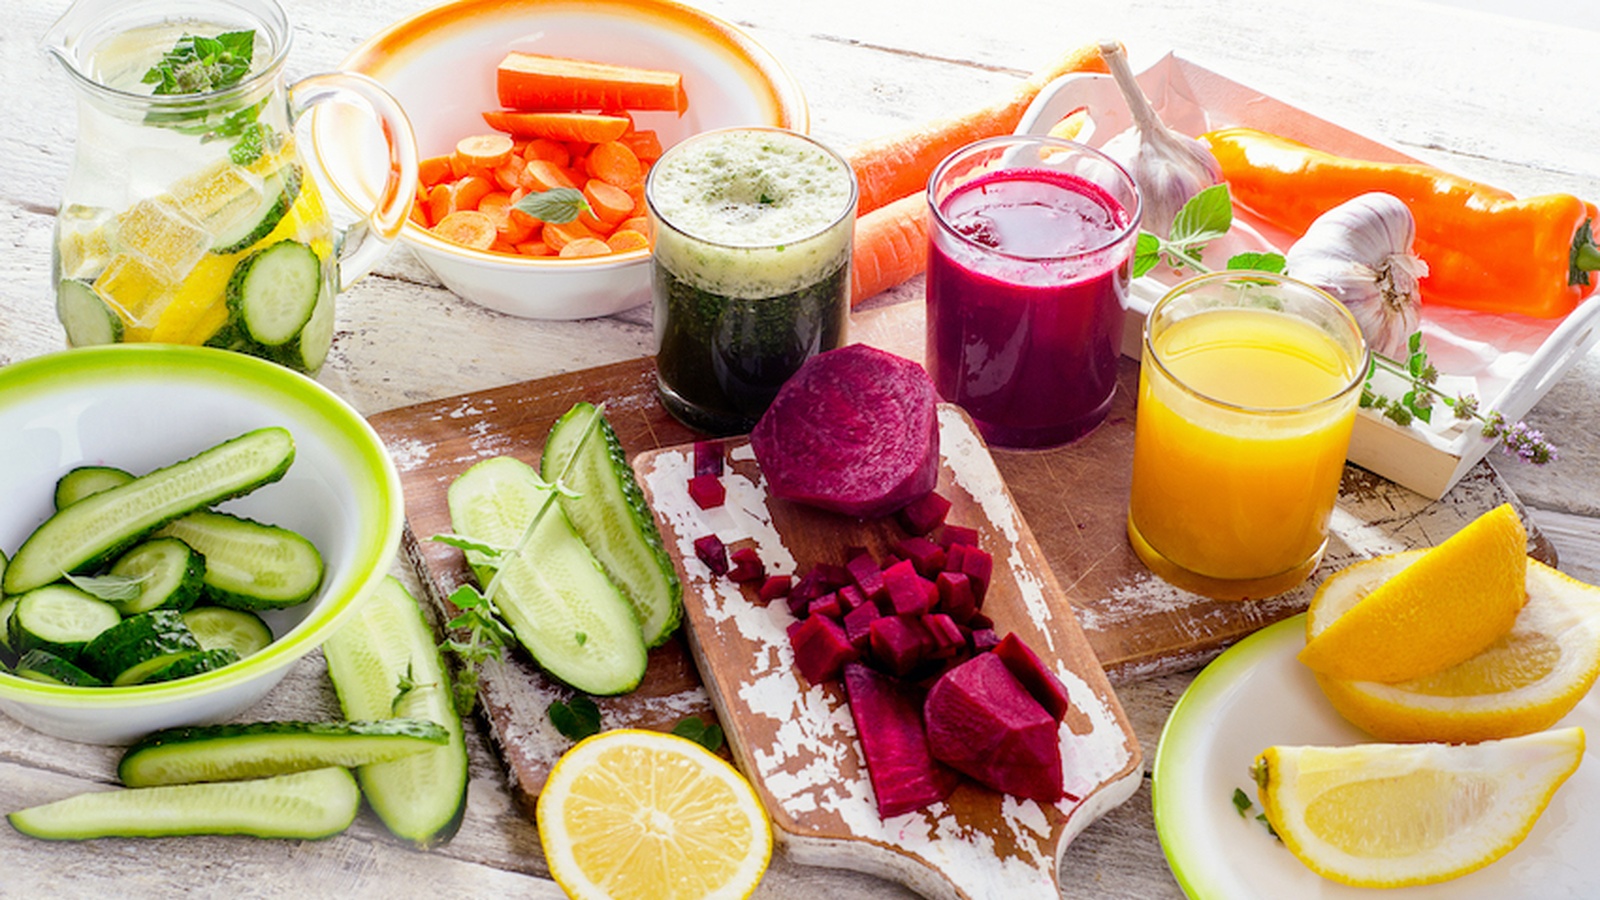 The Real Reason a Cleanse Helps You Lose Weight